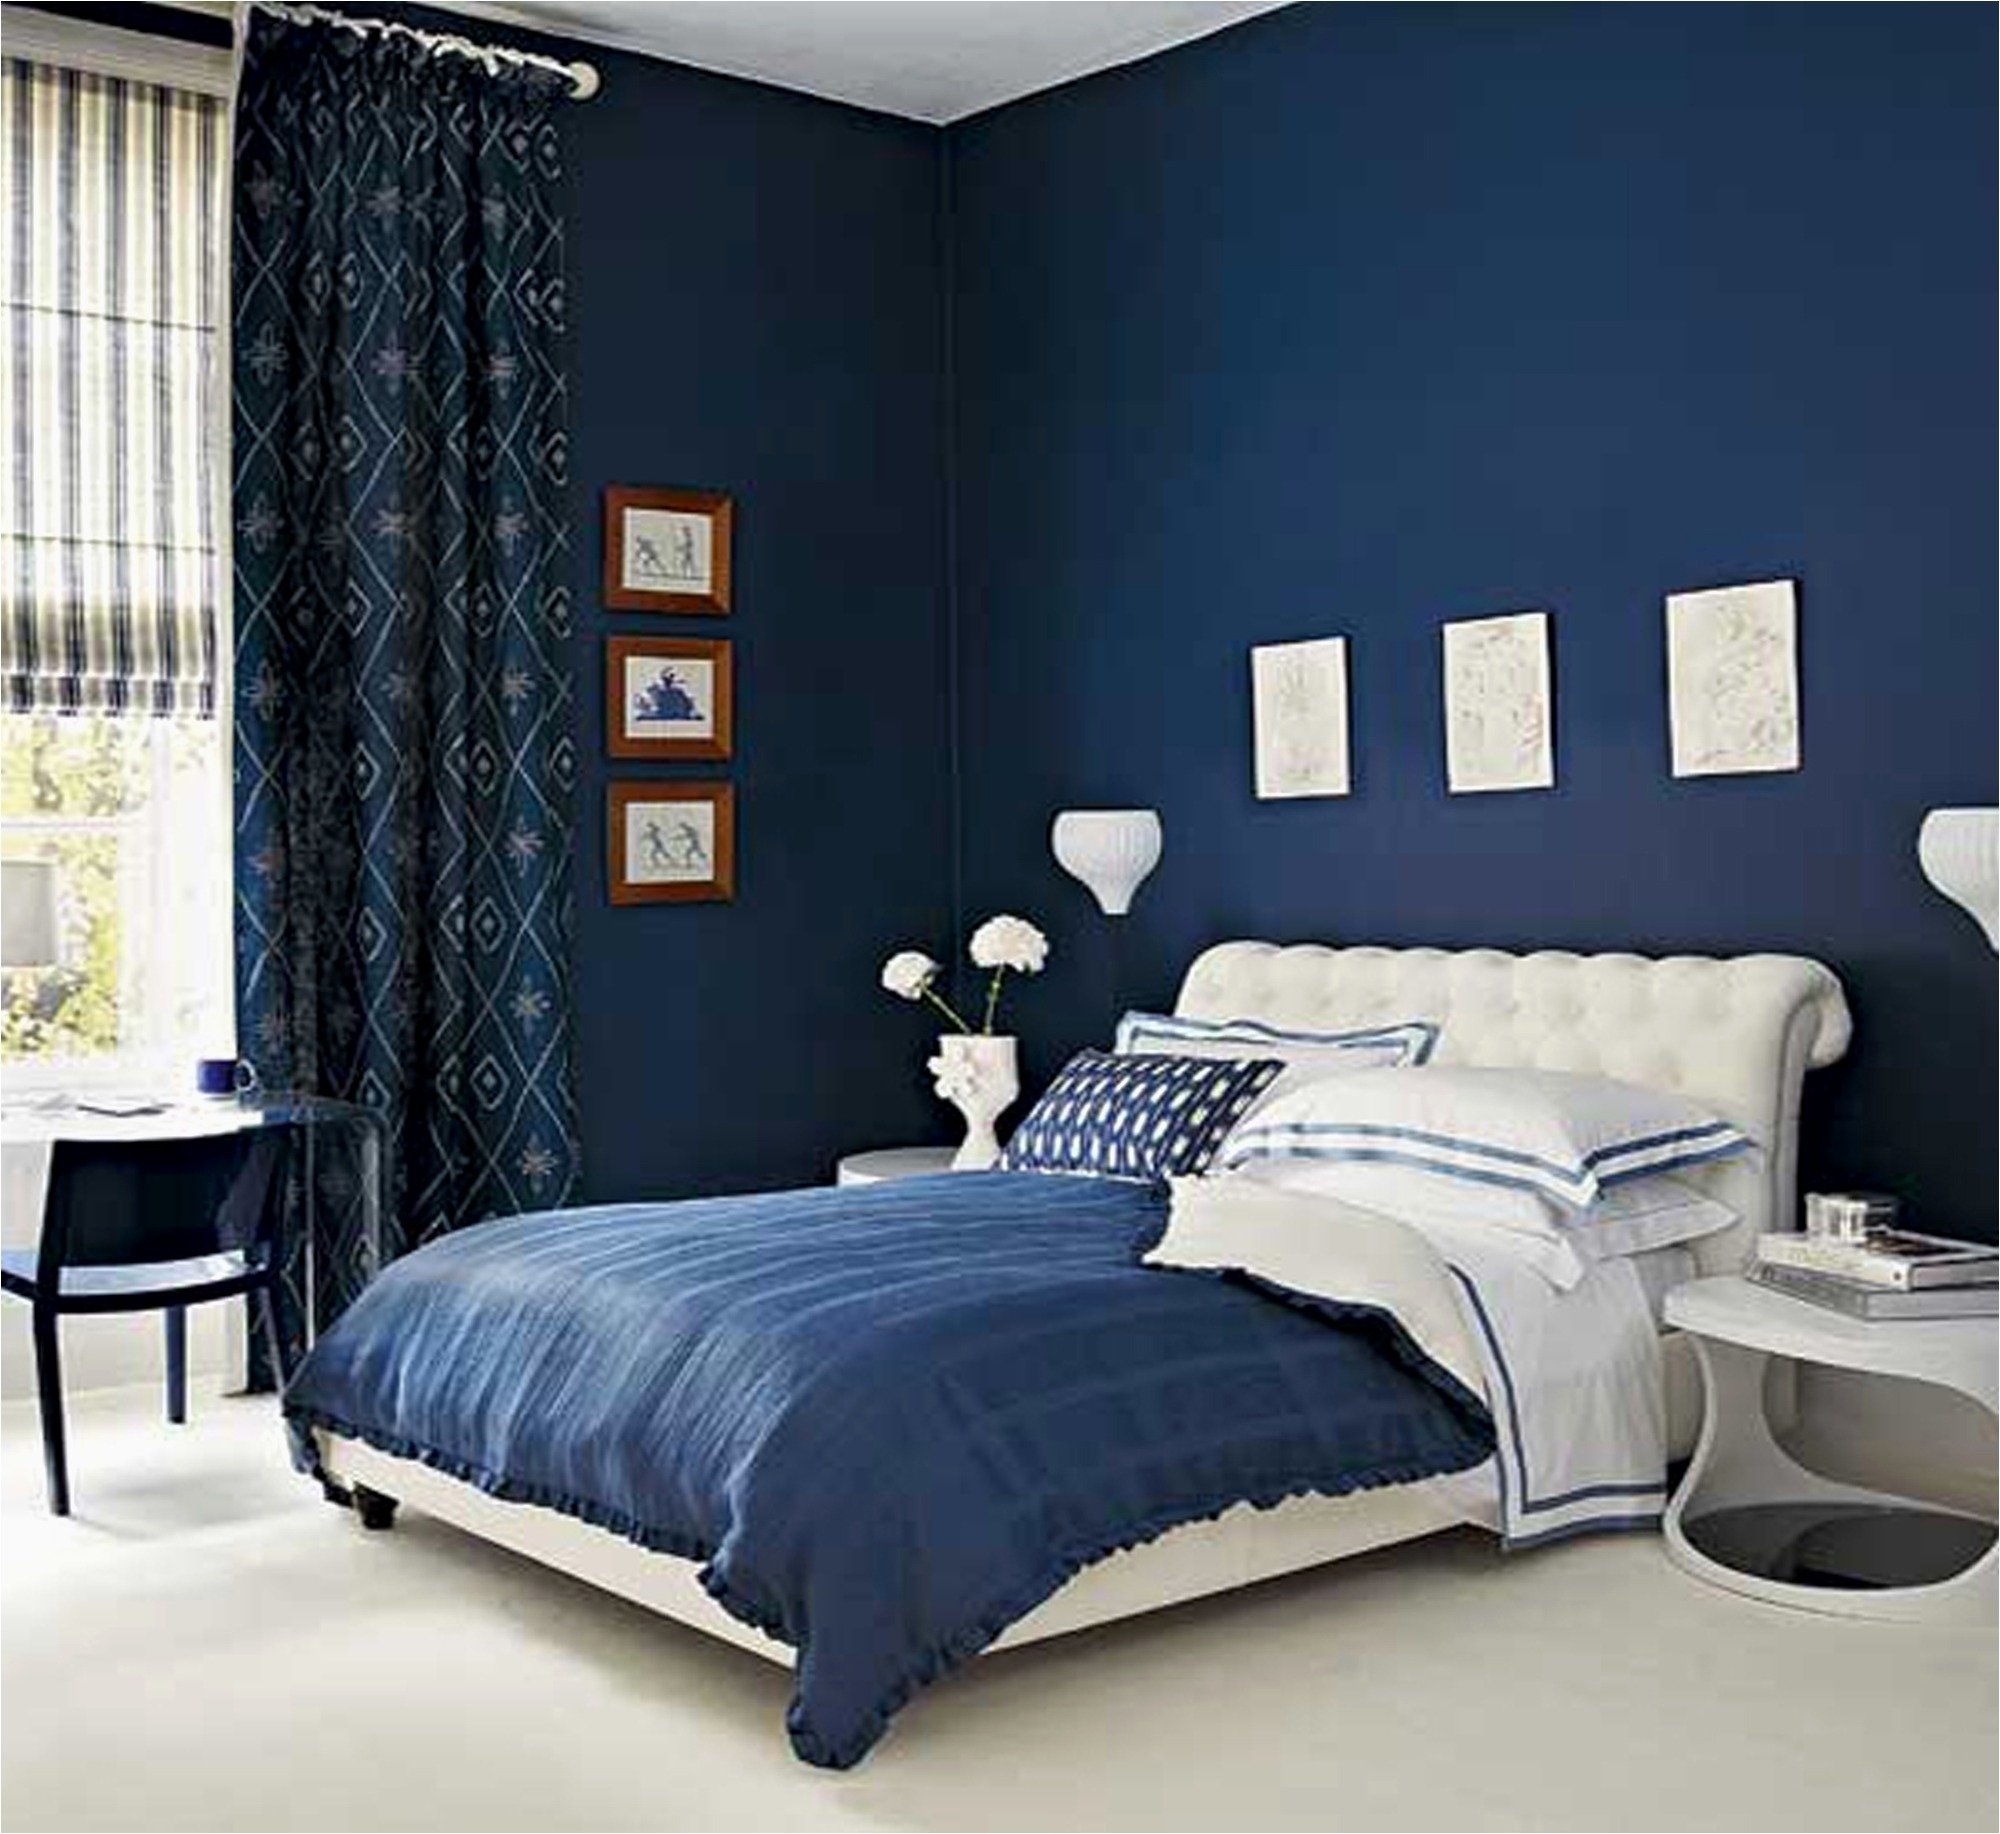 10 Lovable Blue And Black Bedroom Ideas navy and gray bedroom free bedroom cool navy blue and black bedroom 2022